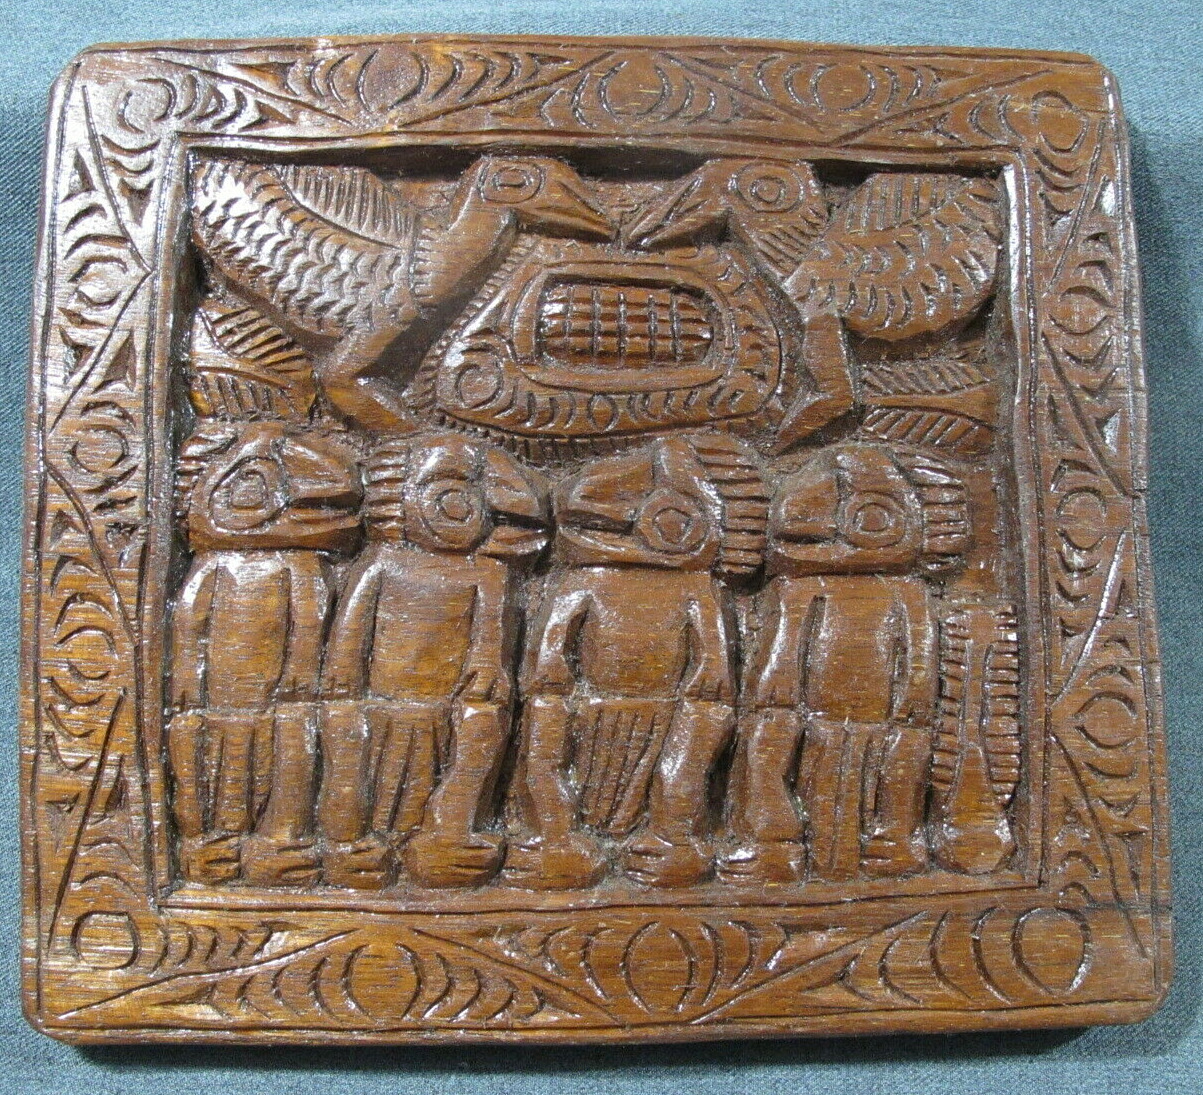 Papua New Guinea carved wooden panel board 9 & 1/2 x 10 & 1/2 inches